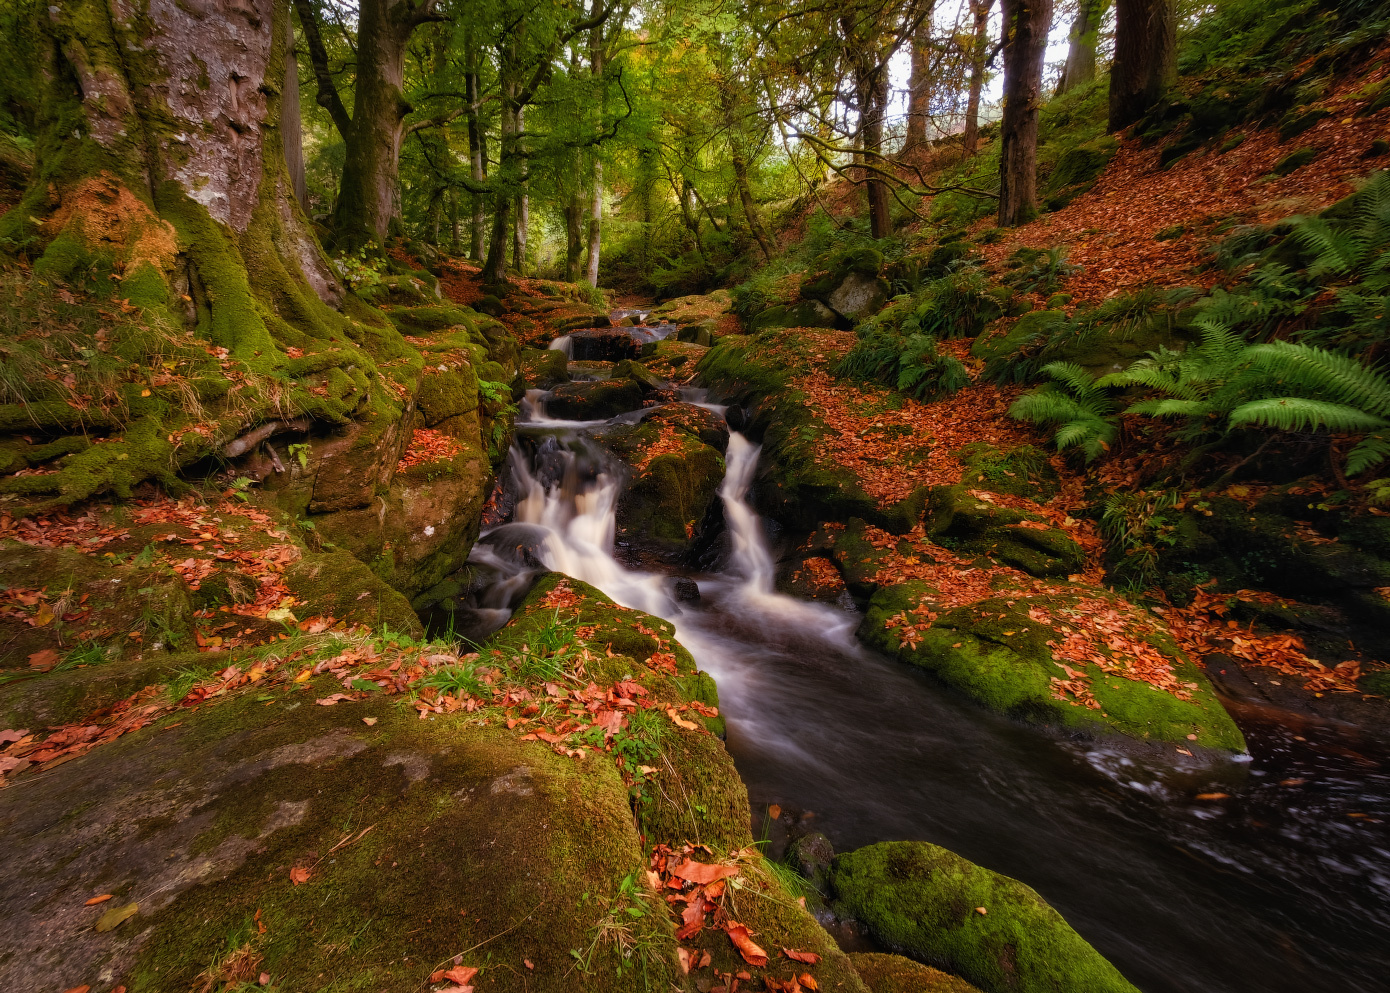 ...Cloghleagh creeks... ireland wicklow national park cloghleagh long exposure nature outdoors mysterious fairy tail scenic scenery wood forest water creek stream rocks stones moss europe picturesque spectacular